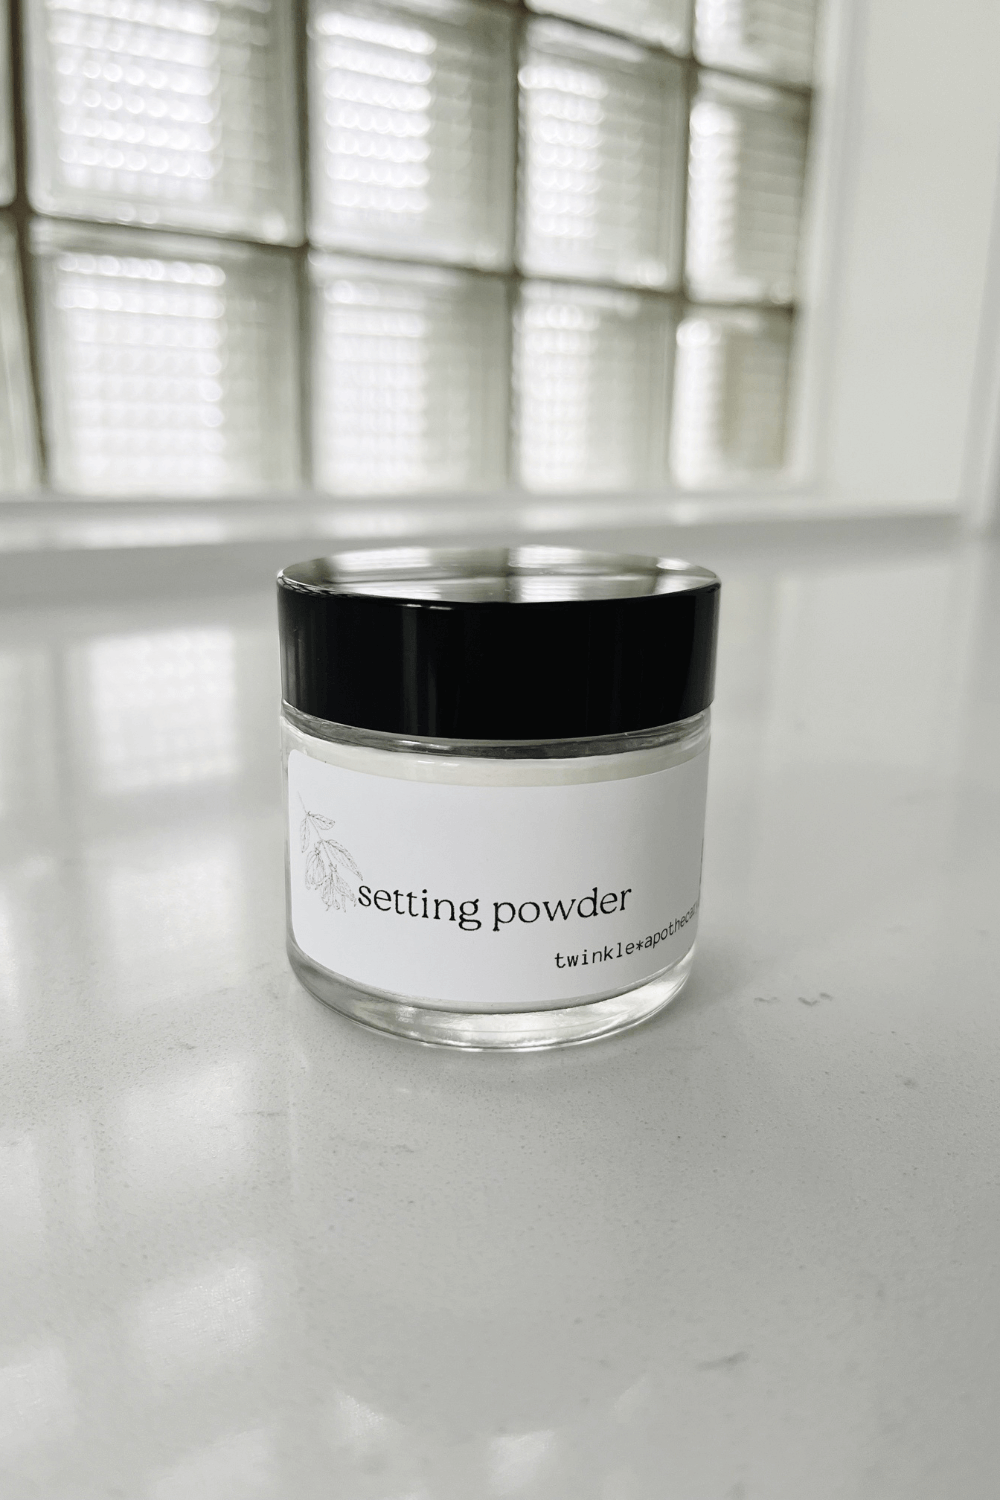 twinkle apothecary setting powder natural makeup in refillable glass jar 